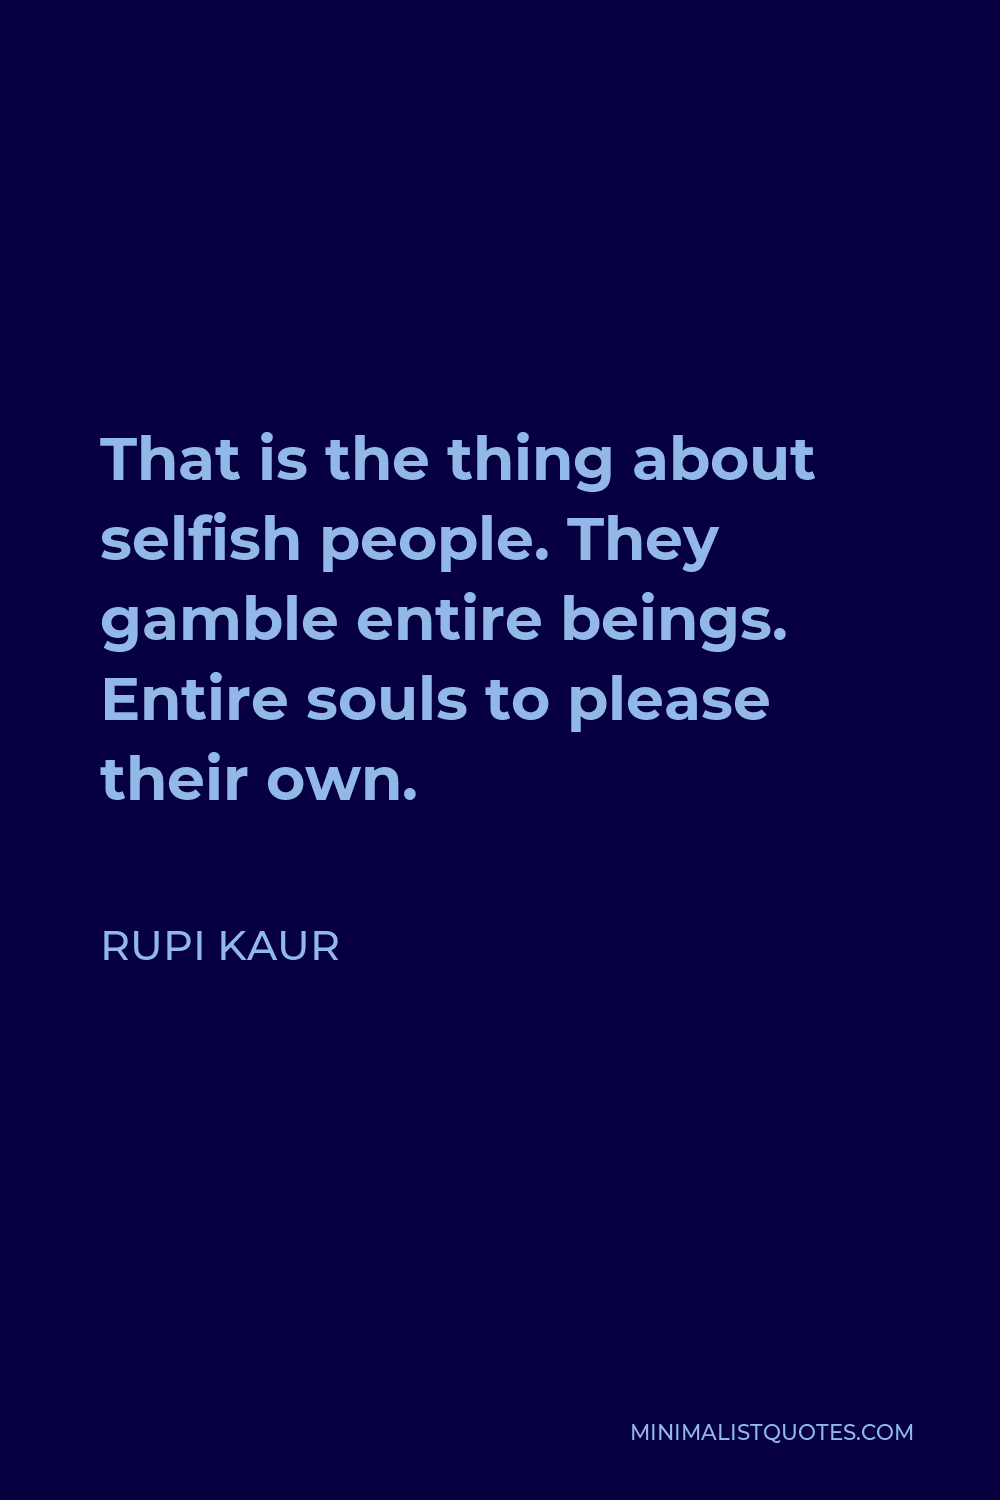 Rupi Kaur Quote: That is the thing about selfish people. They ...